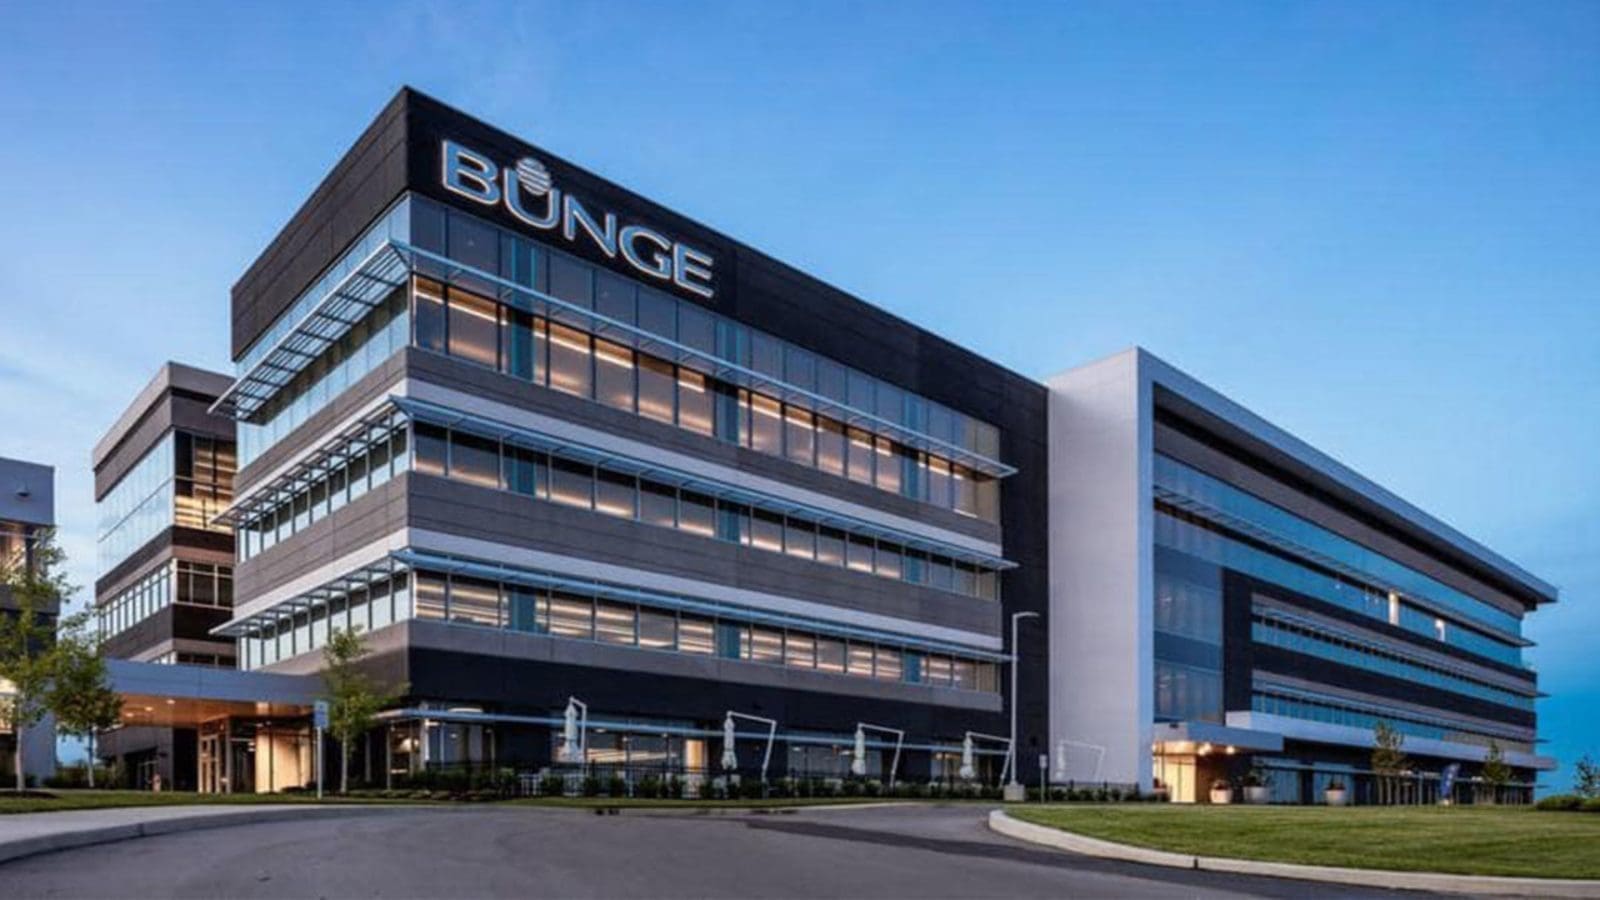 Bunge sells Russian oilseed processing business